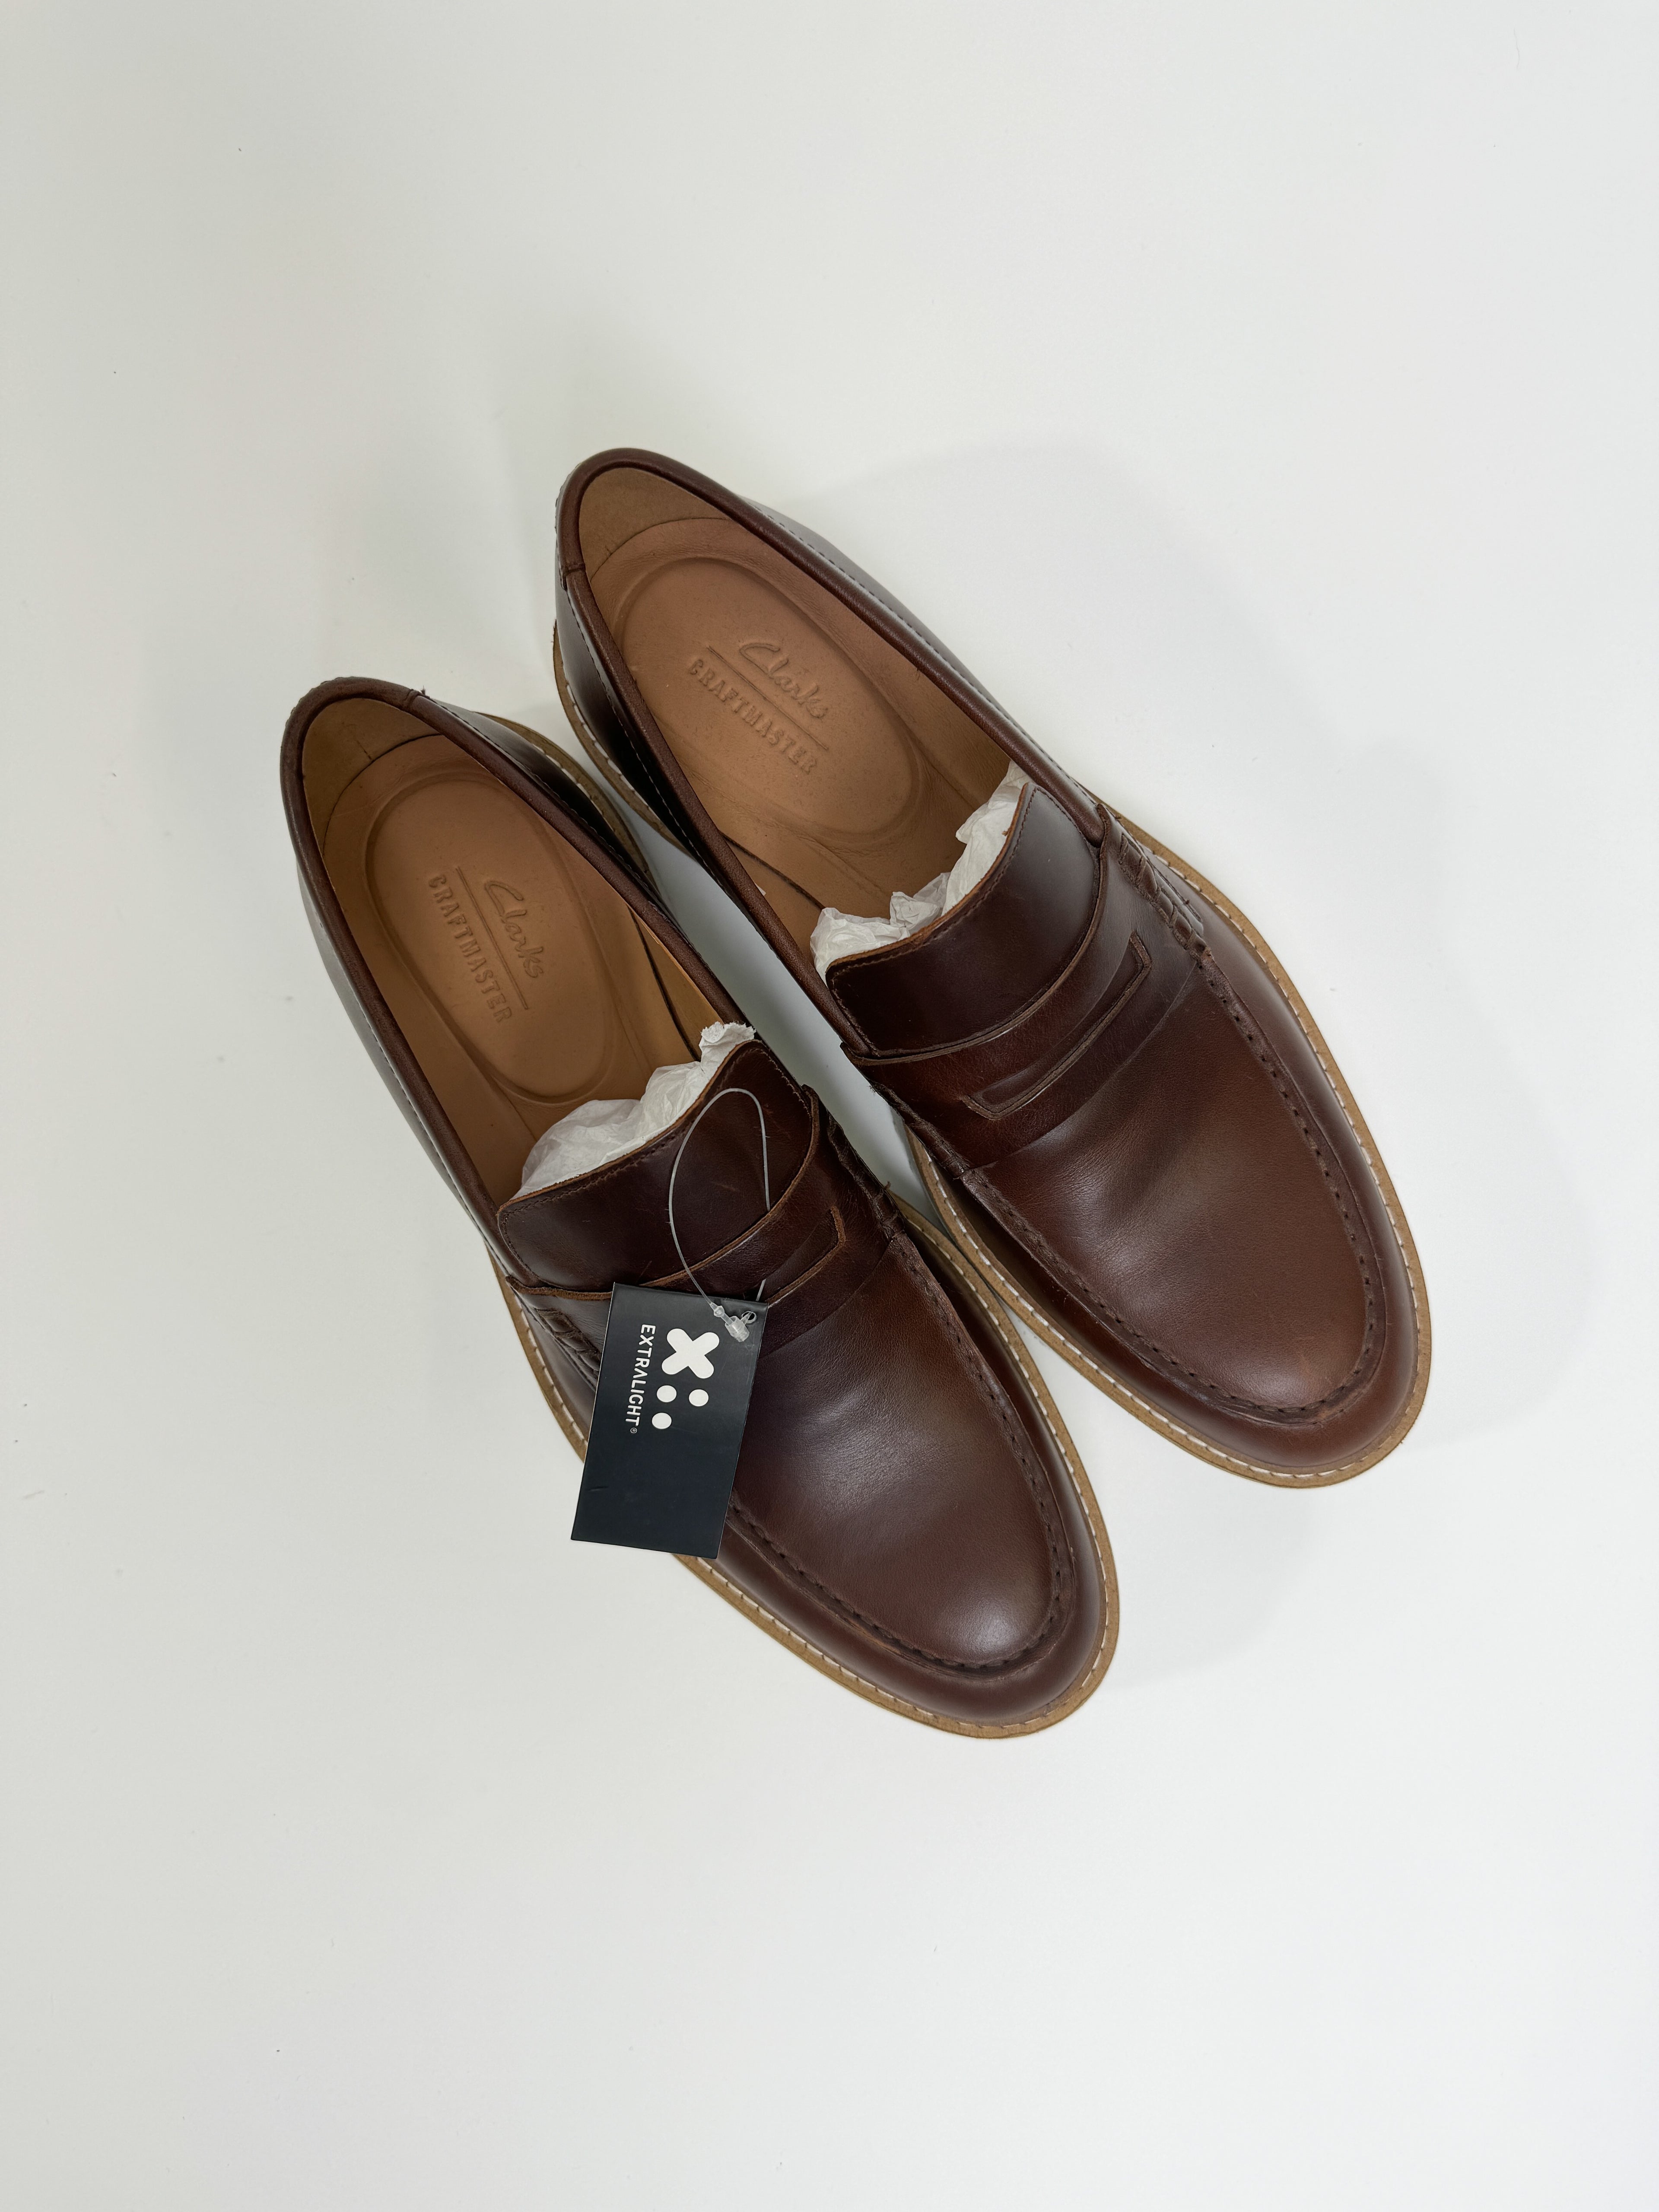 Clarks Dark Tan Leather Loafers